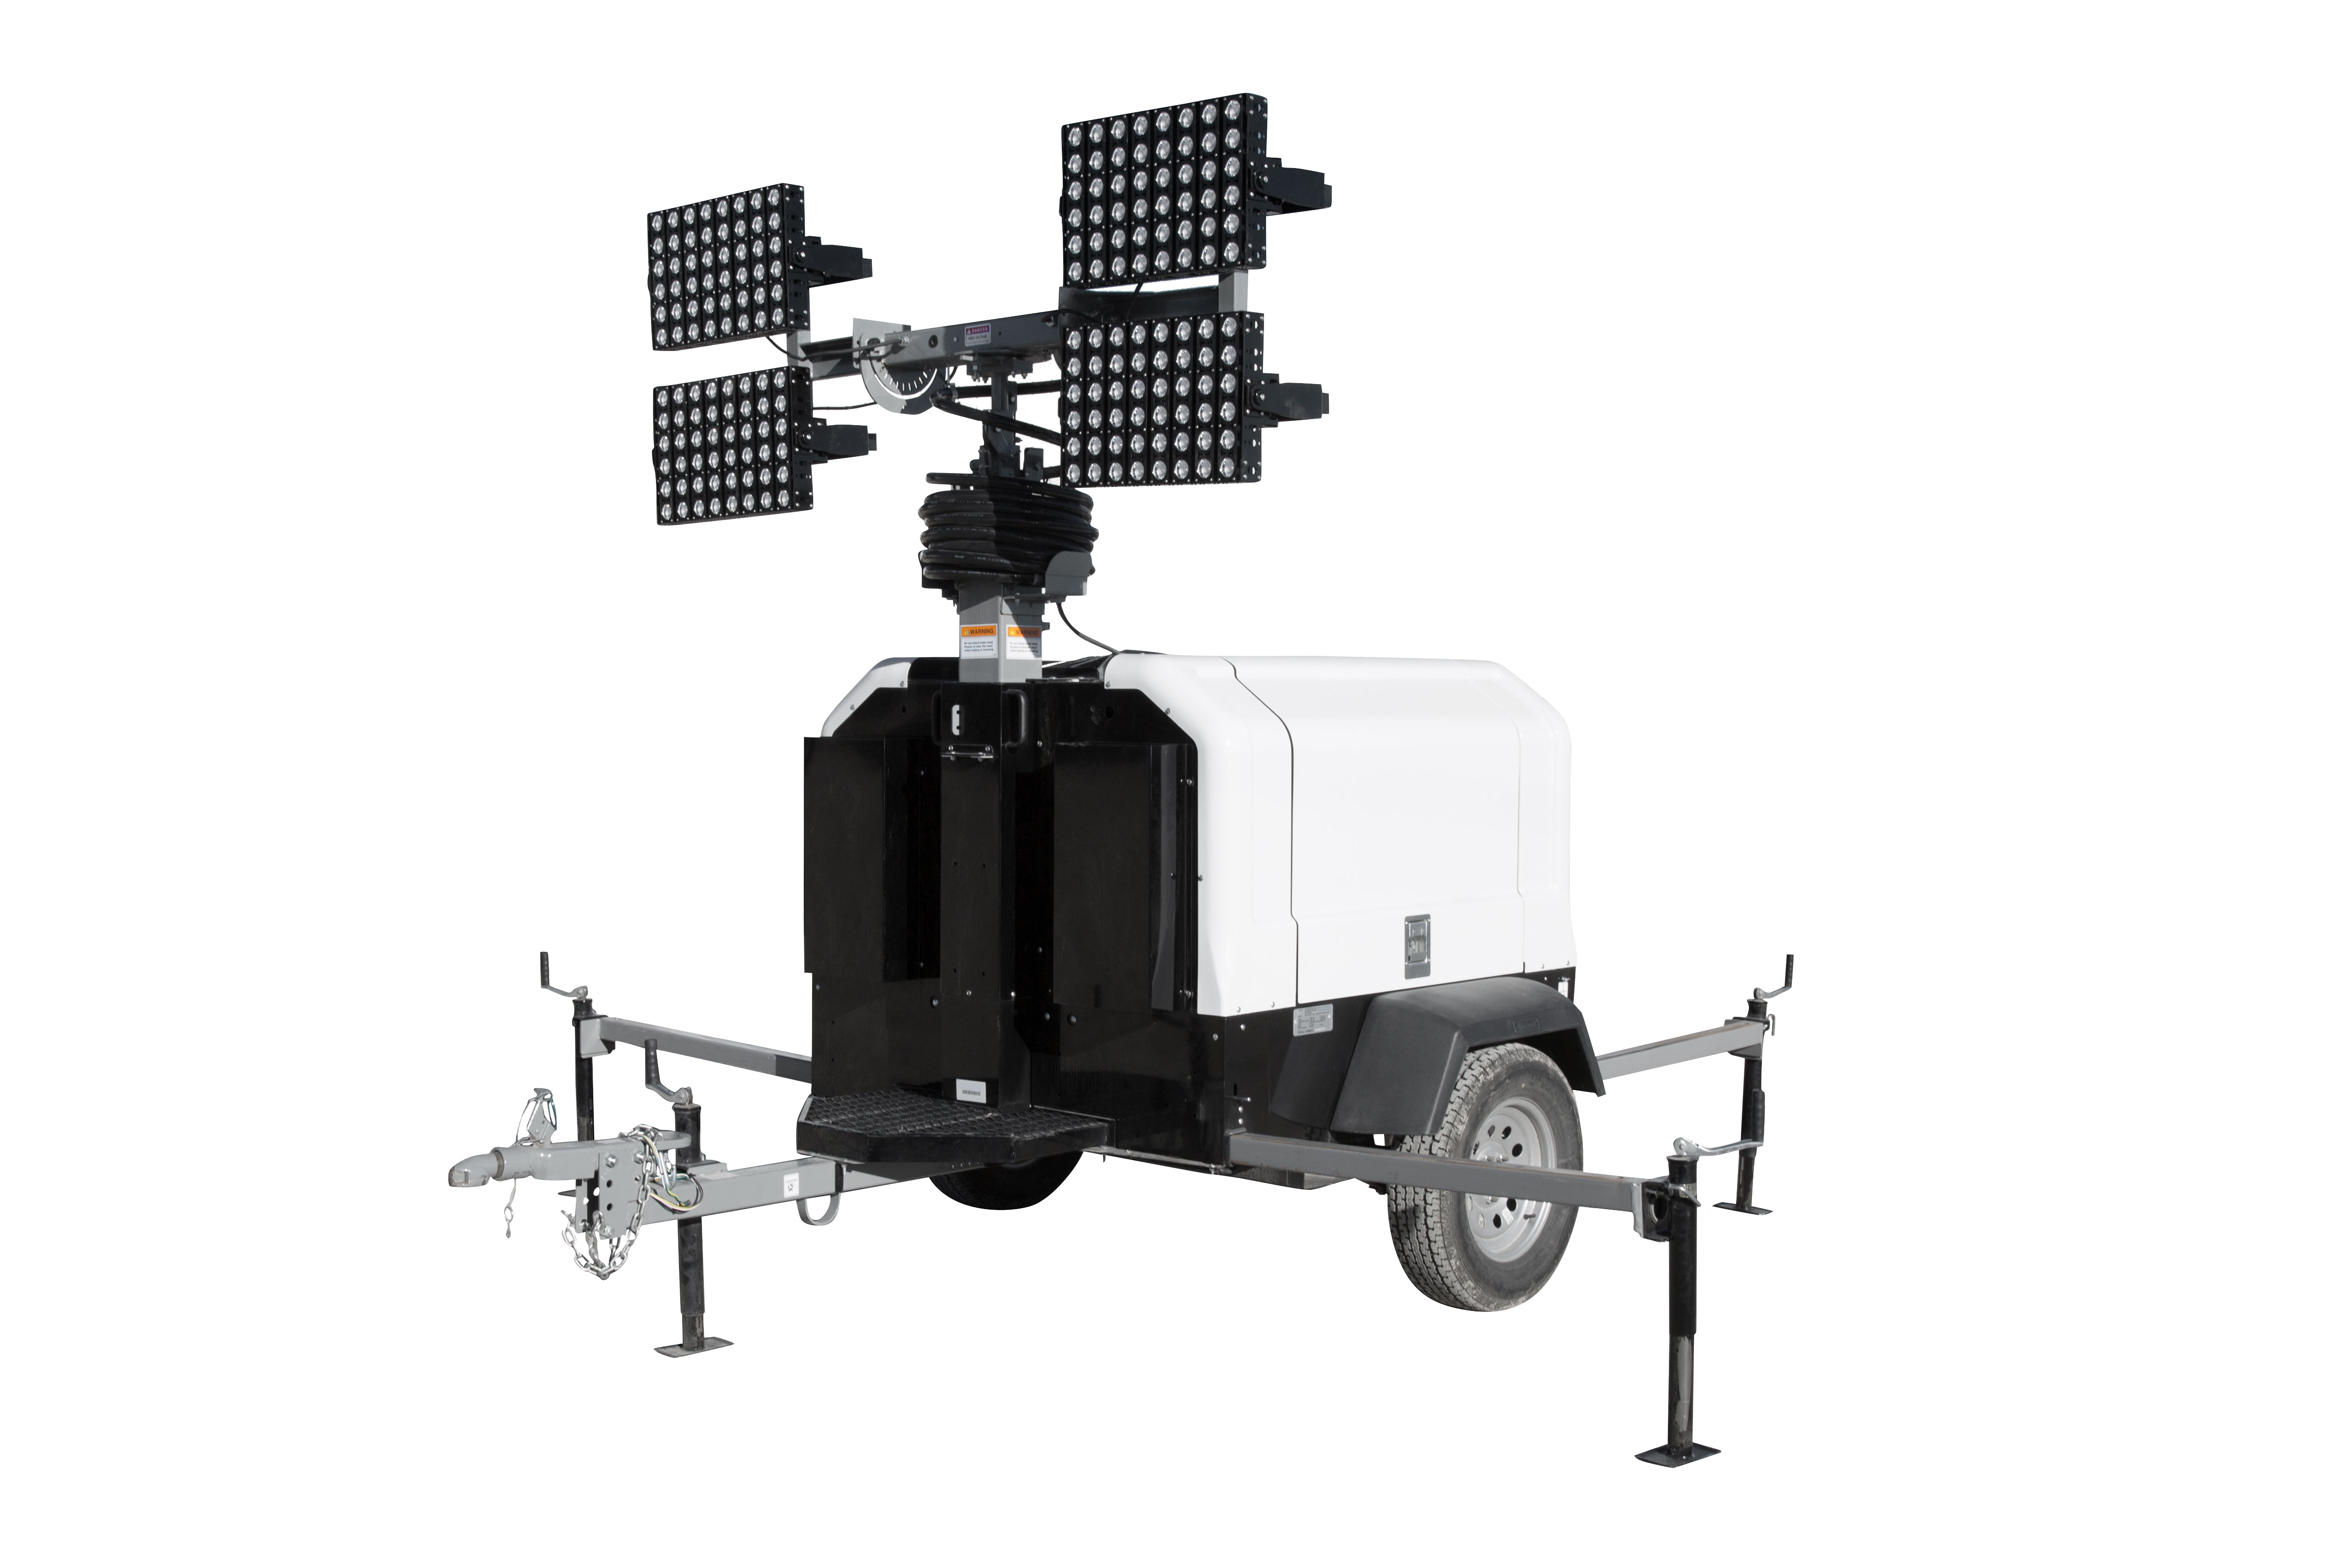 Self-Contained Towable LED Light Tower Equipped with Four LED Light Heads